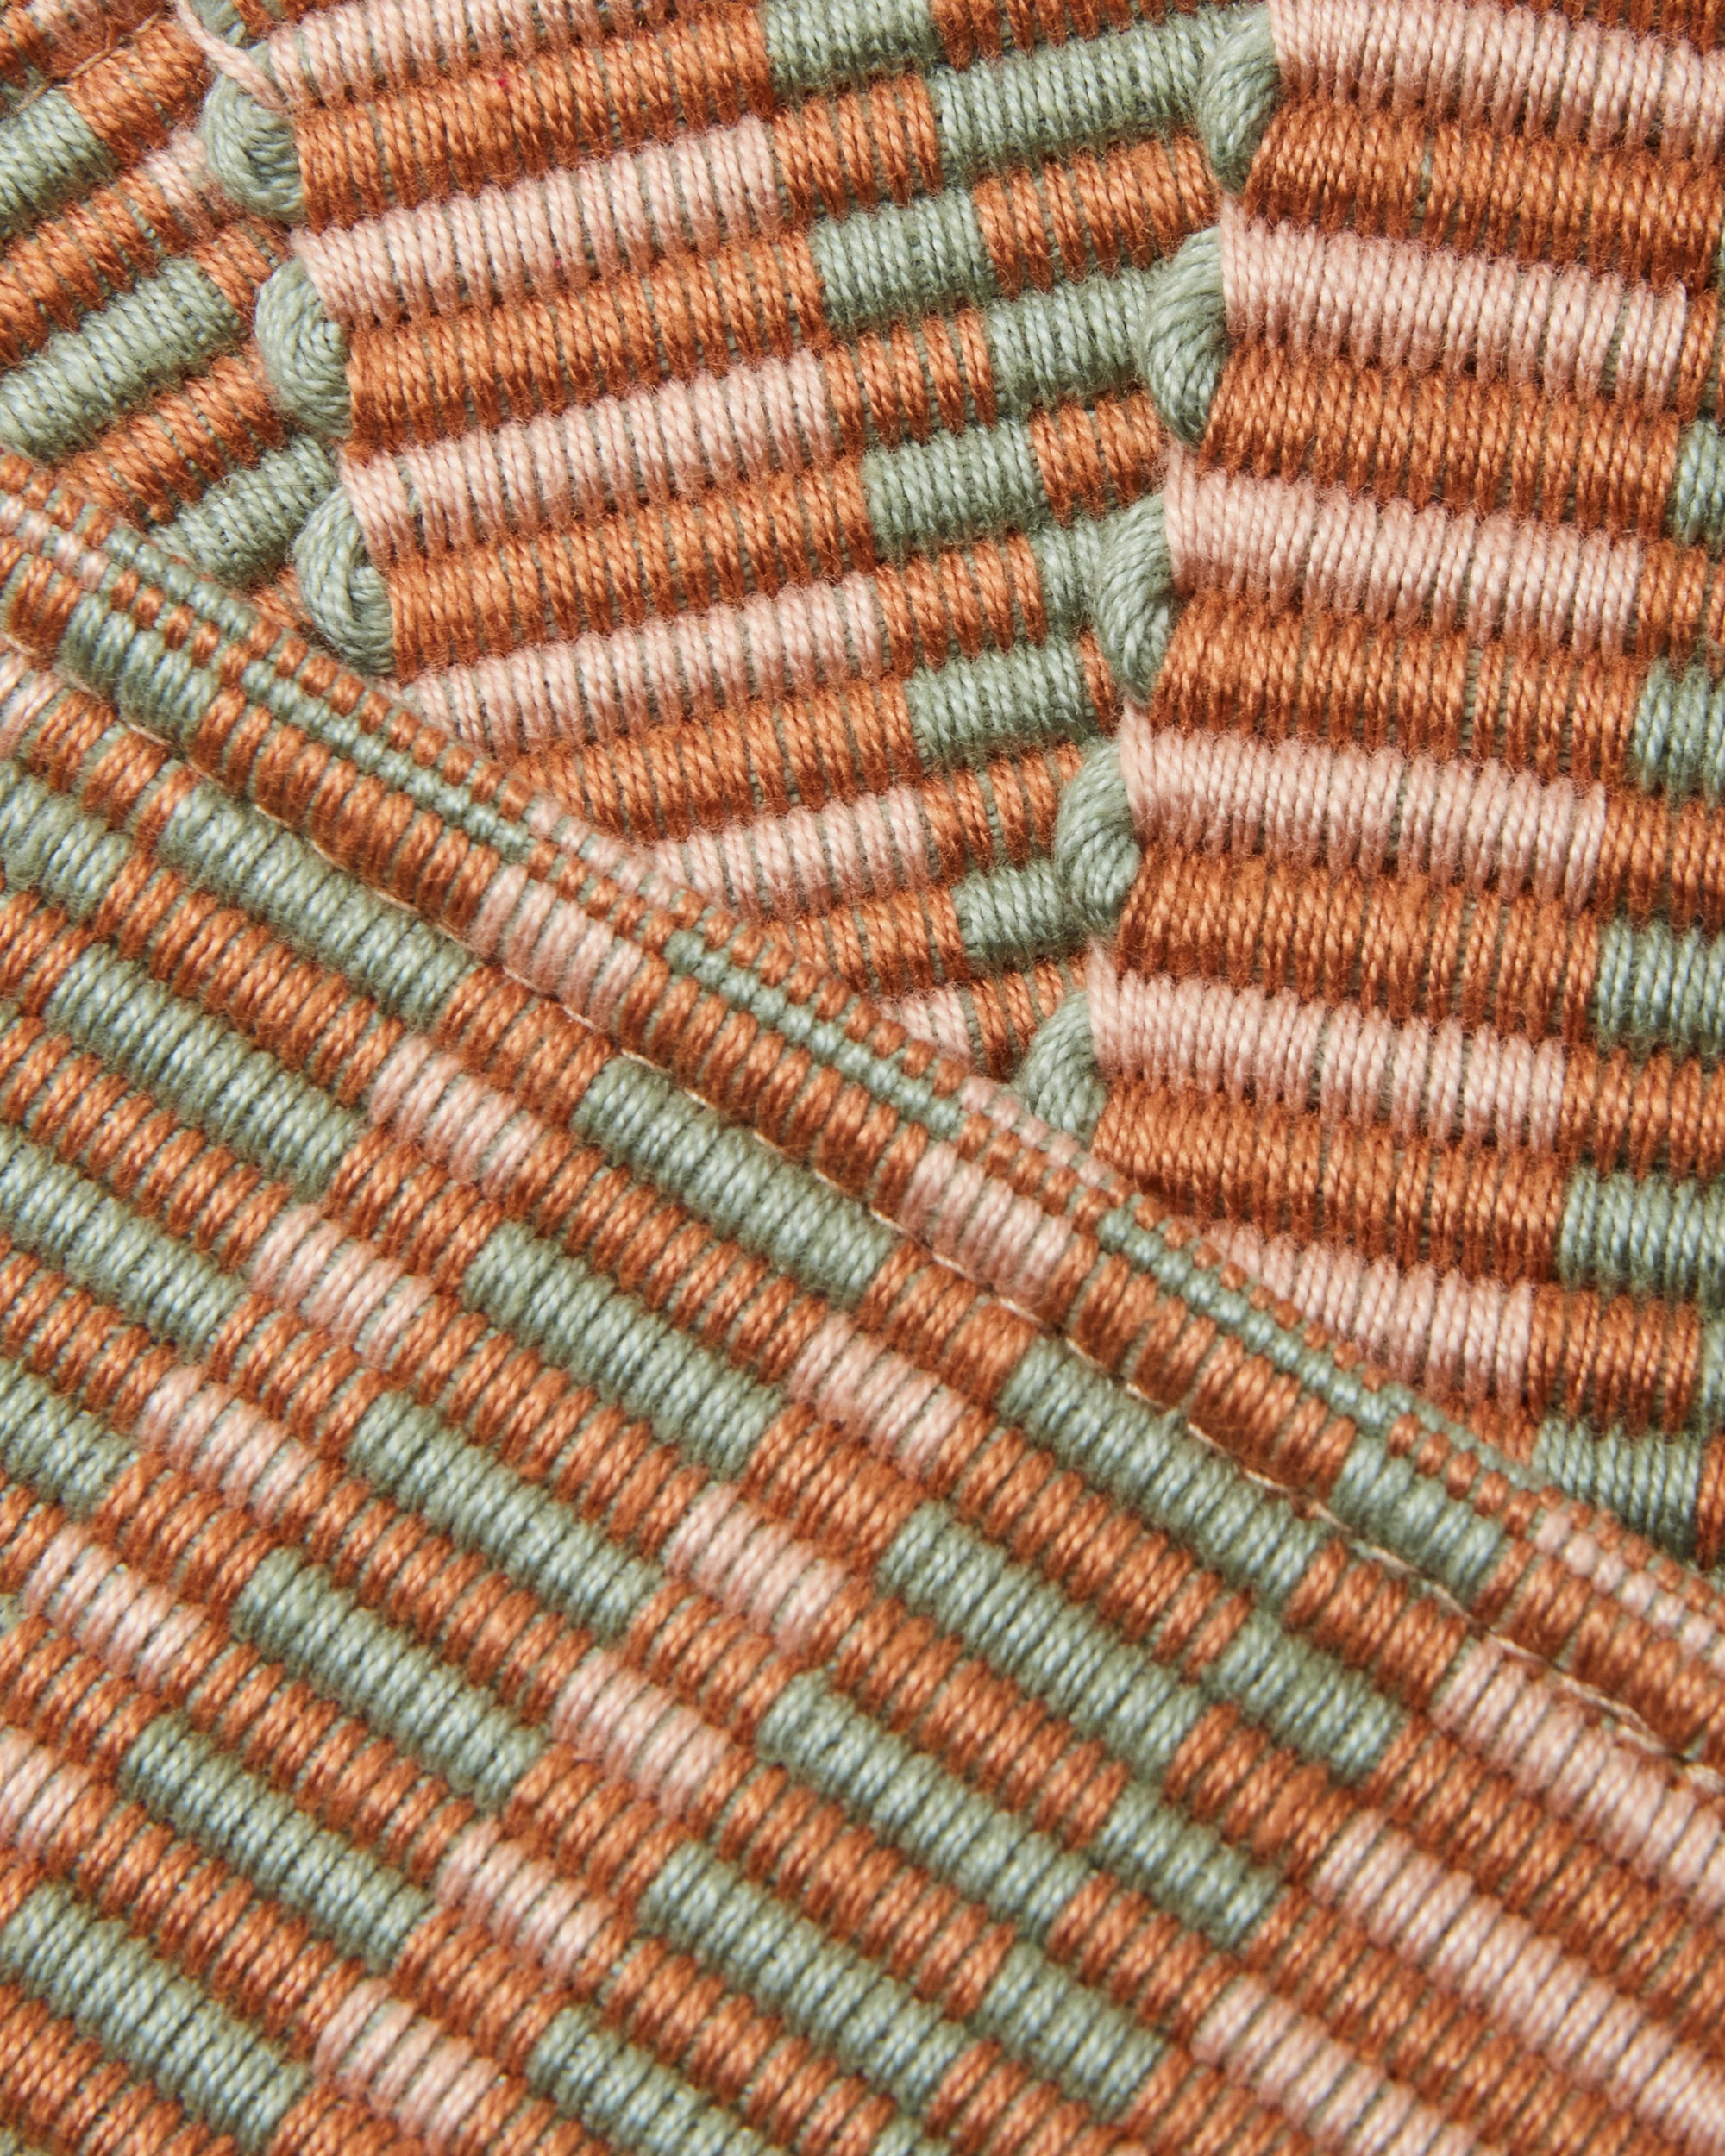 close-up detail of ethically handwoven cotton MINNA coaster terracotta, light pink, sage